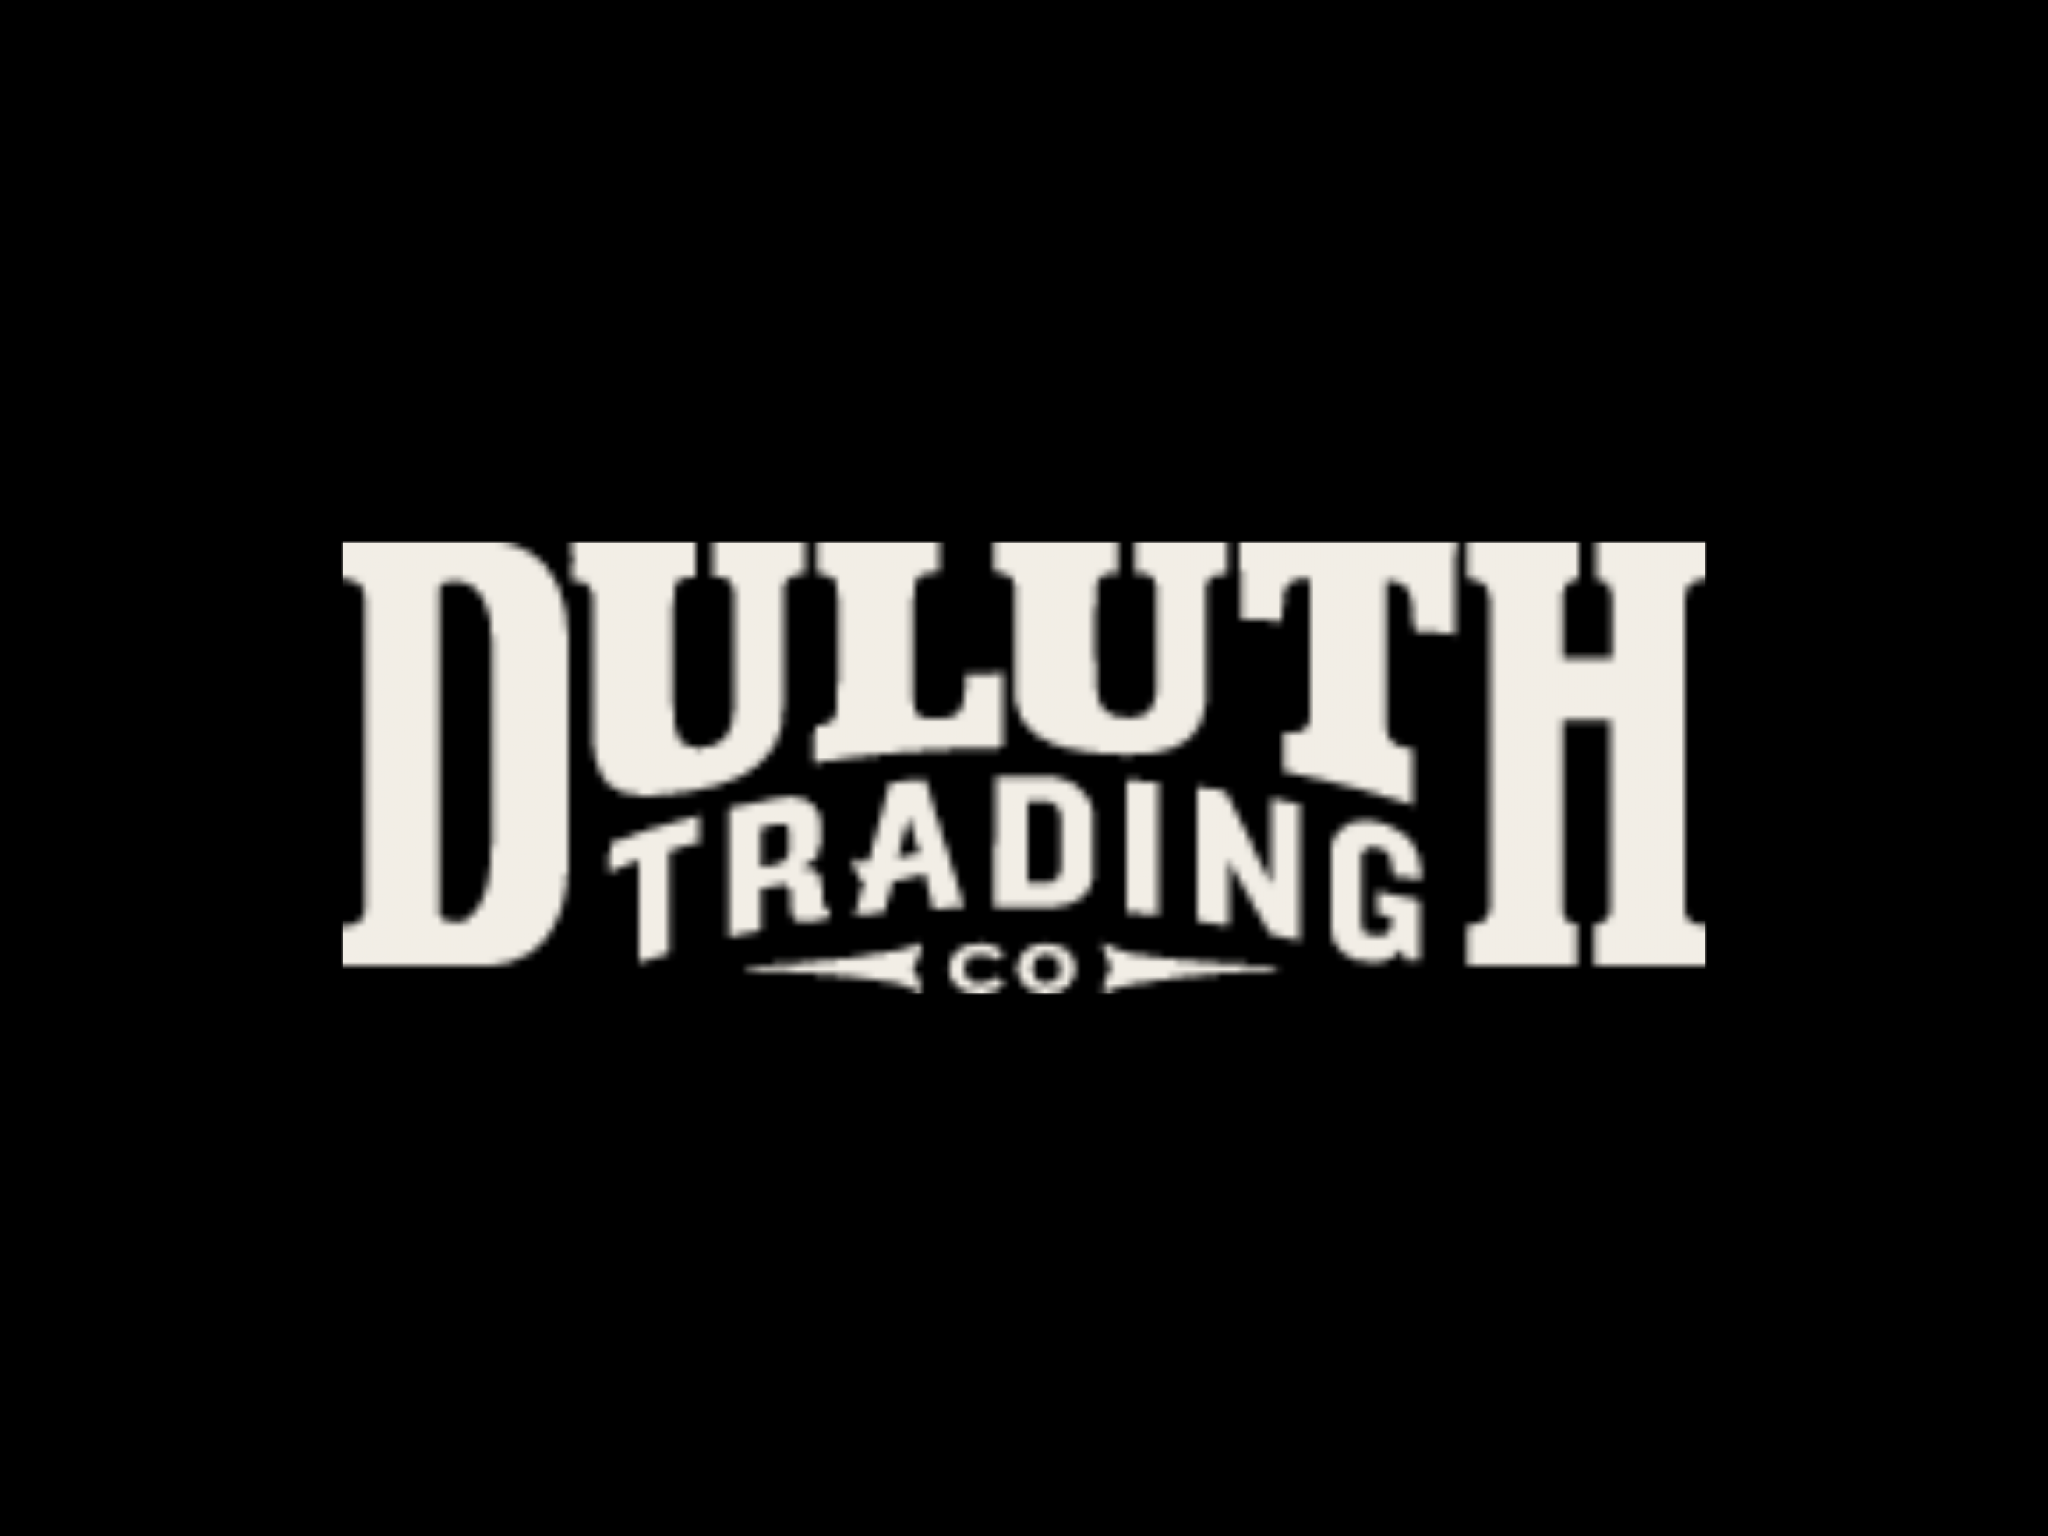  workwear-and-accessories-company-duluth-lowers-fy23-outlook-as-slower-store-traffic-hits-q3-results 